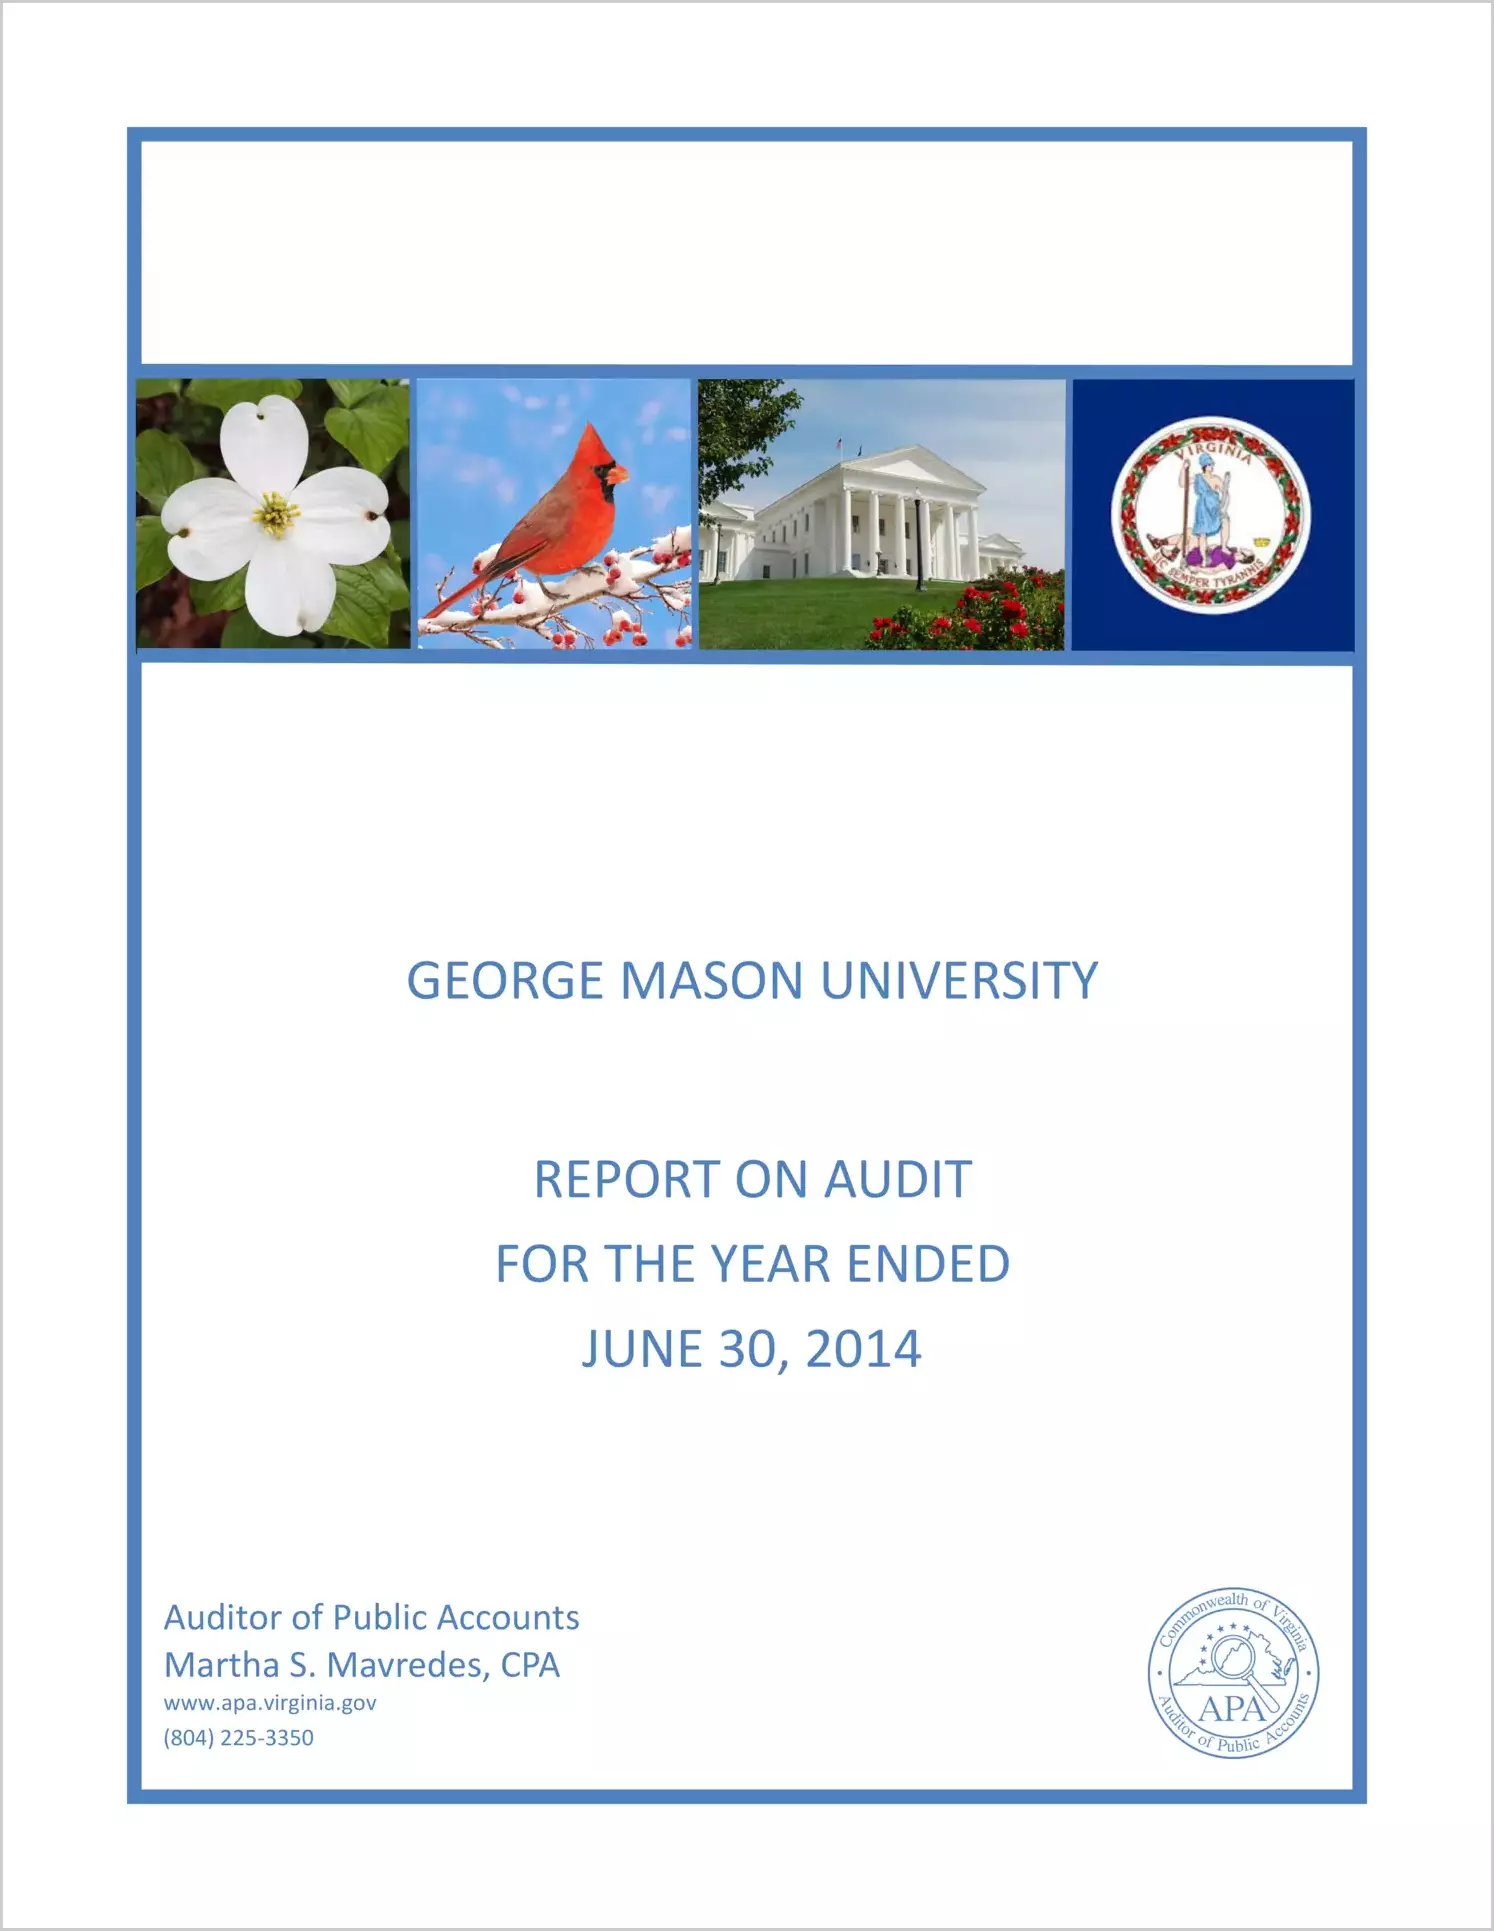 George Mason University for the year ended June 30, 2014